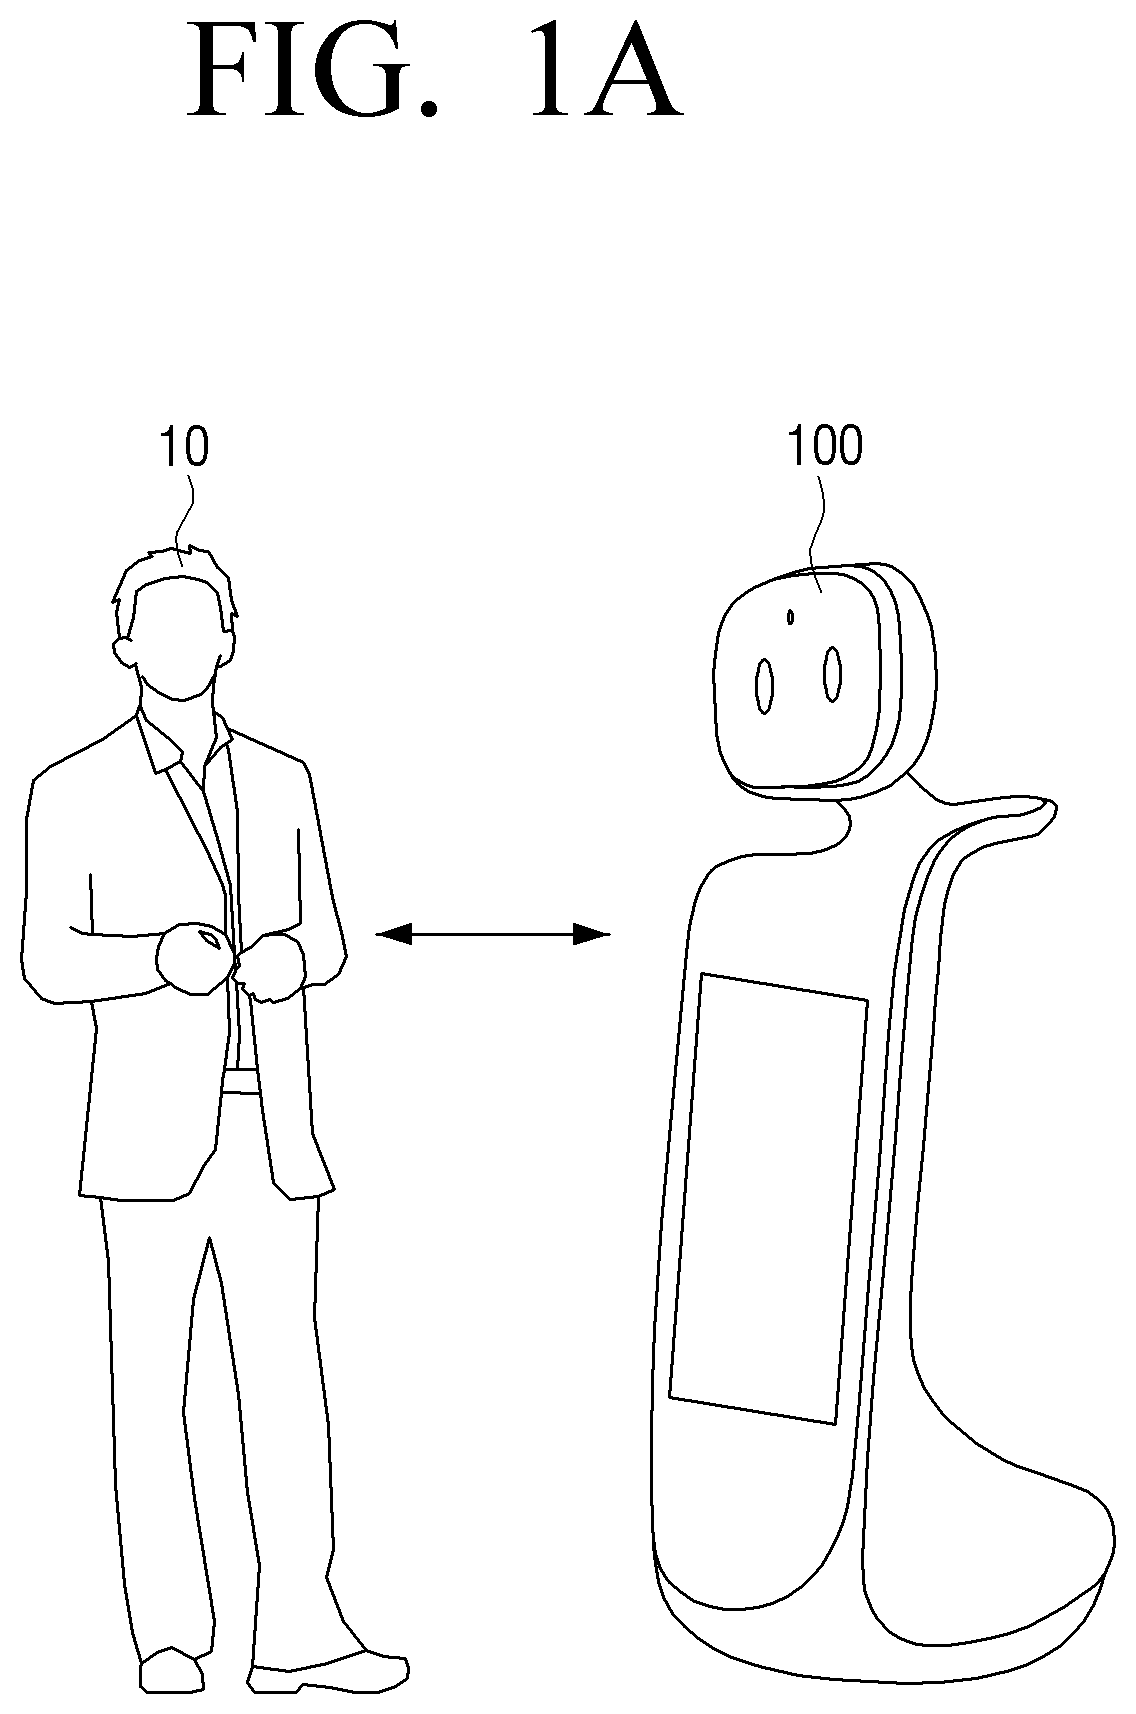 Robot for preventing interruption while interacting with user